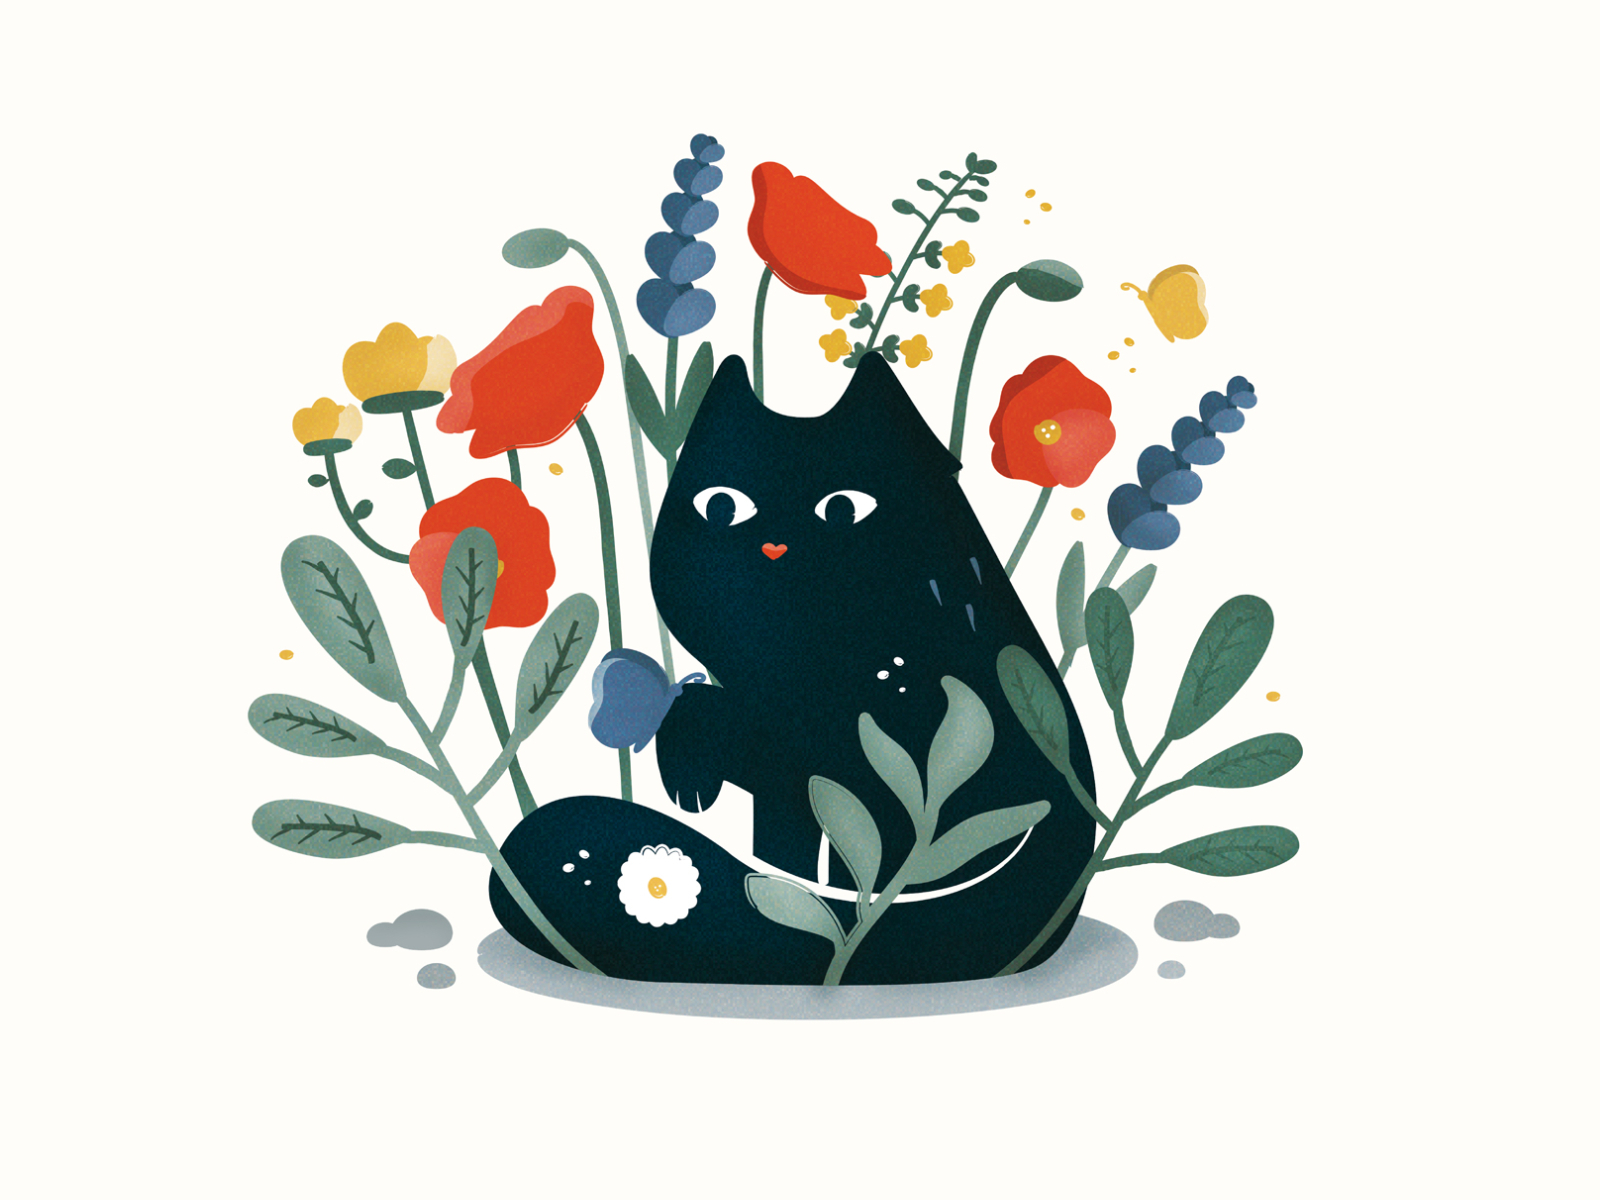 Black cat in the garden by Liza Geurts on Dribbble